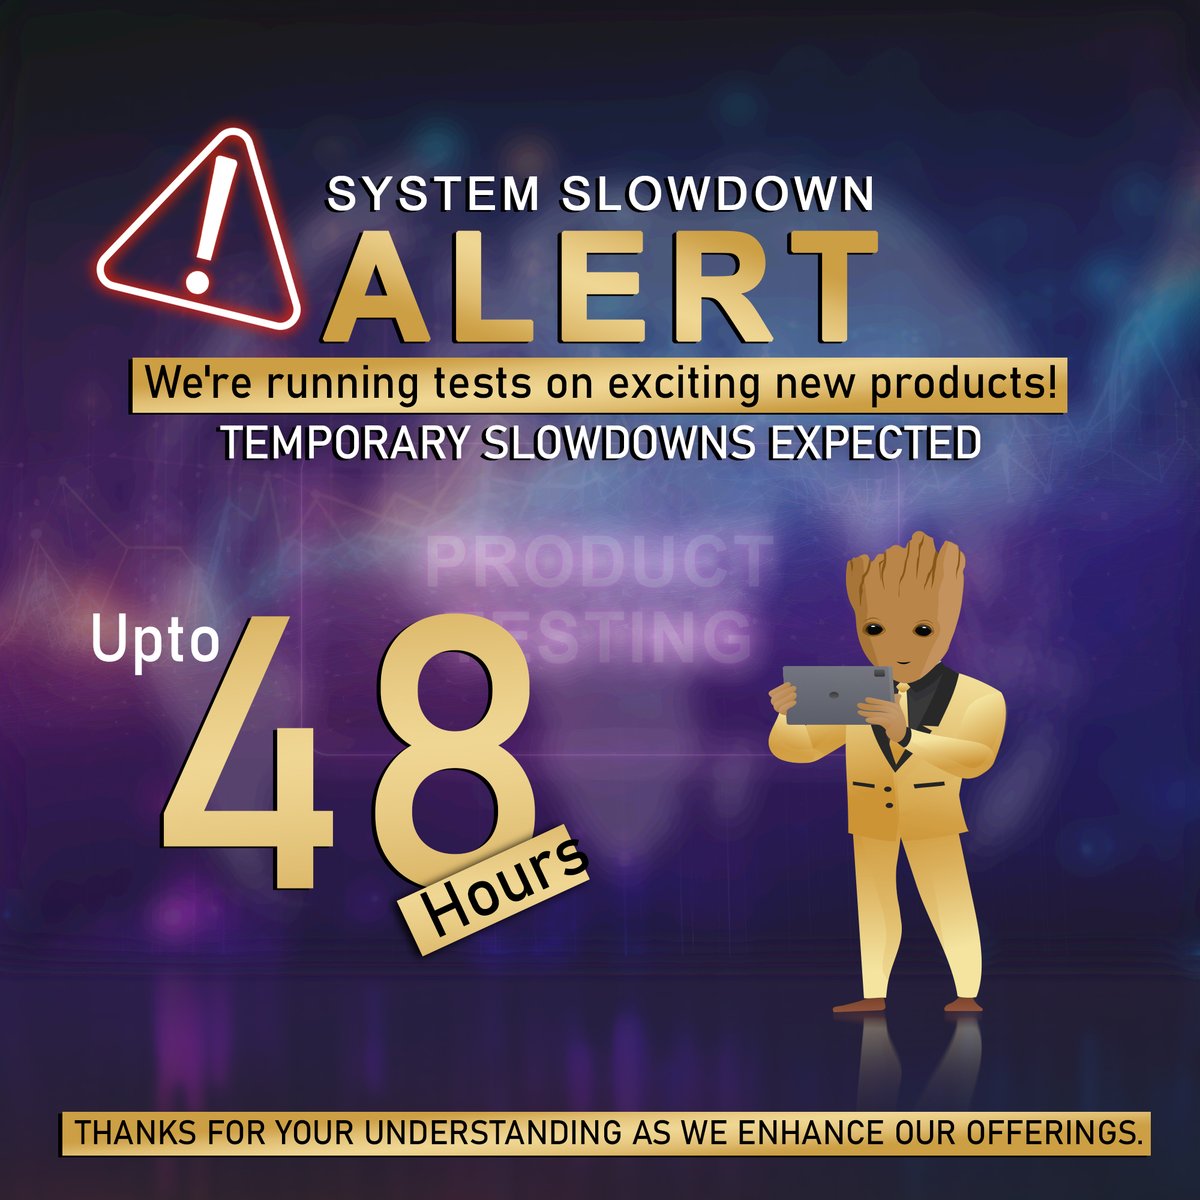 System Slowdown Alert
We're running tests on exciting new products! Temporary slowdowns expected (upto 48 hours). Thanks for your understanding as we enhance our offerings.

#slowdownalert #producttesting #vrcnetwork #vrcscan #vrc #vzoneworld #vrcrewards #vrcworld #btc #vrccoin